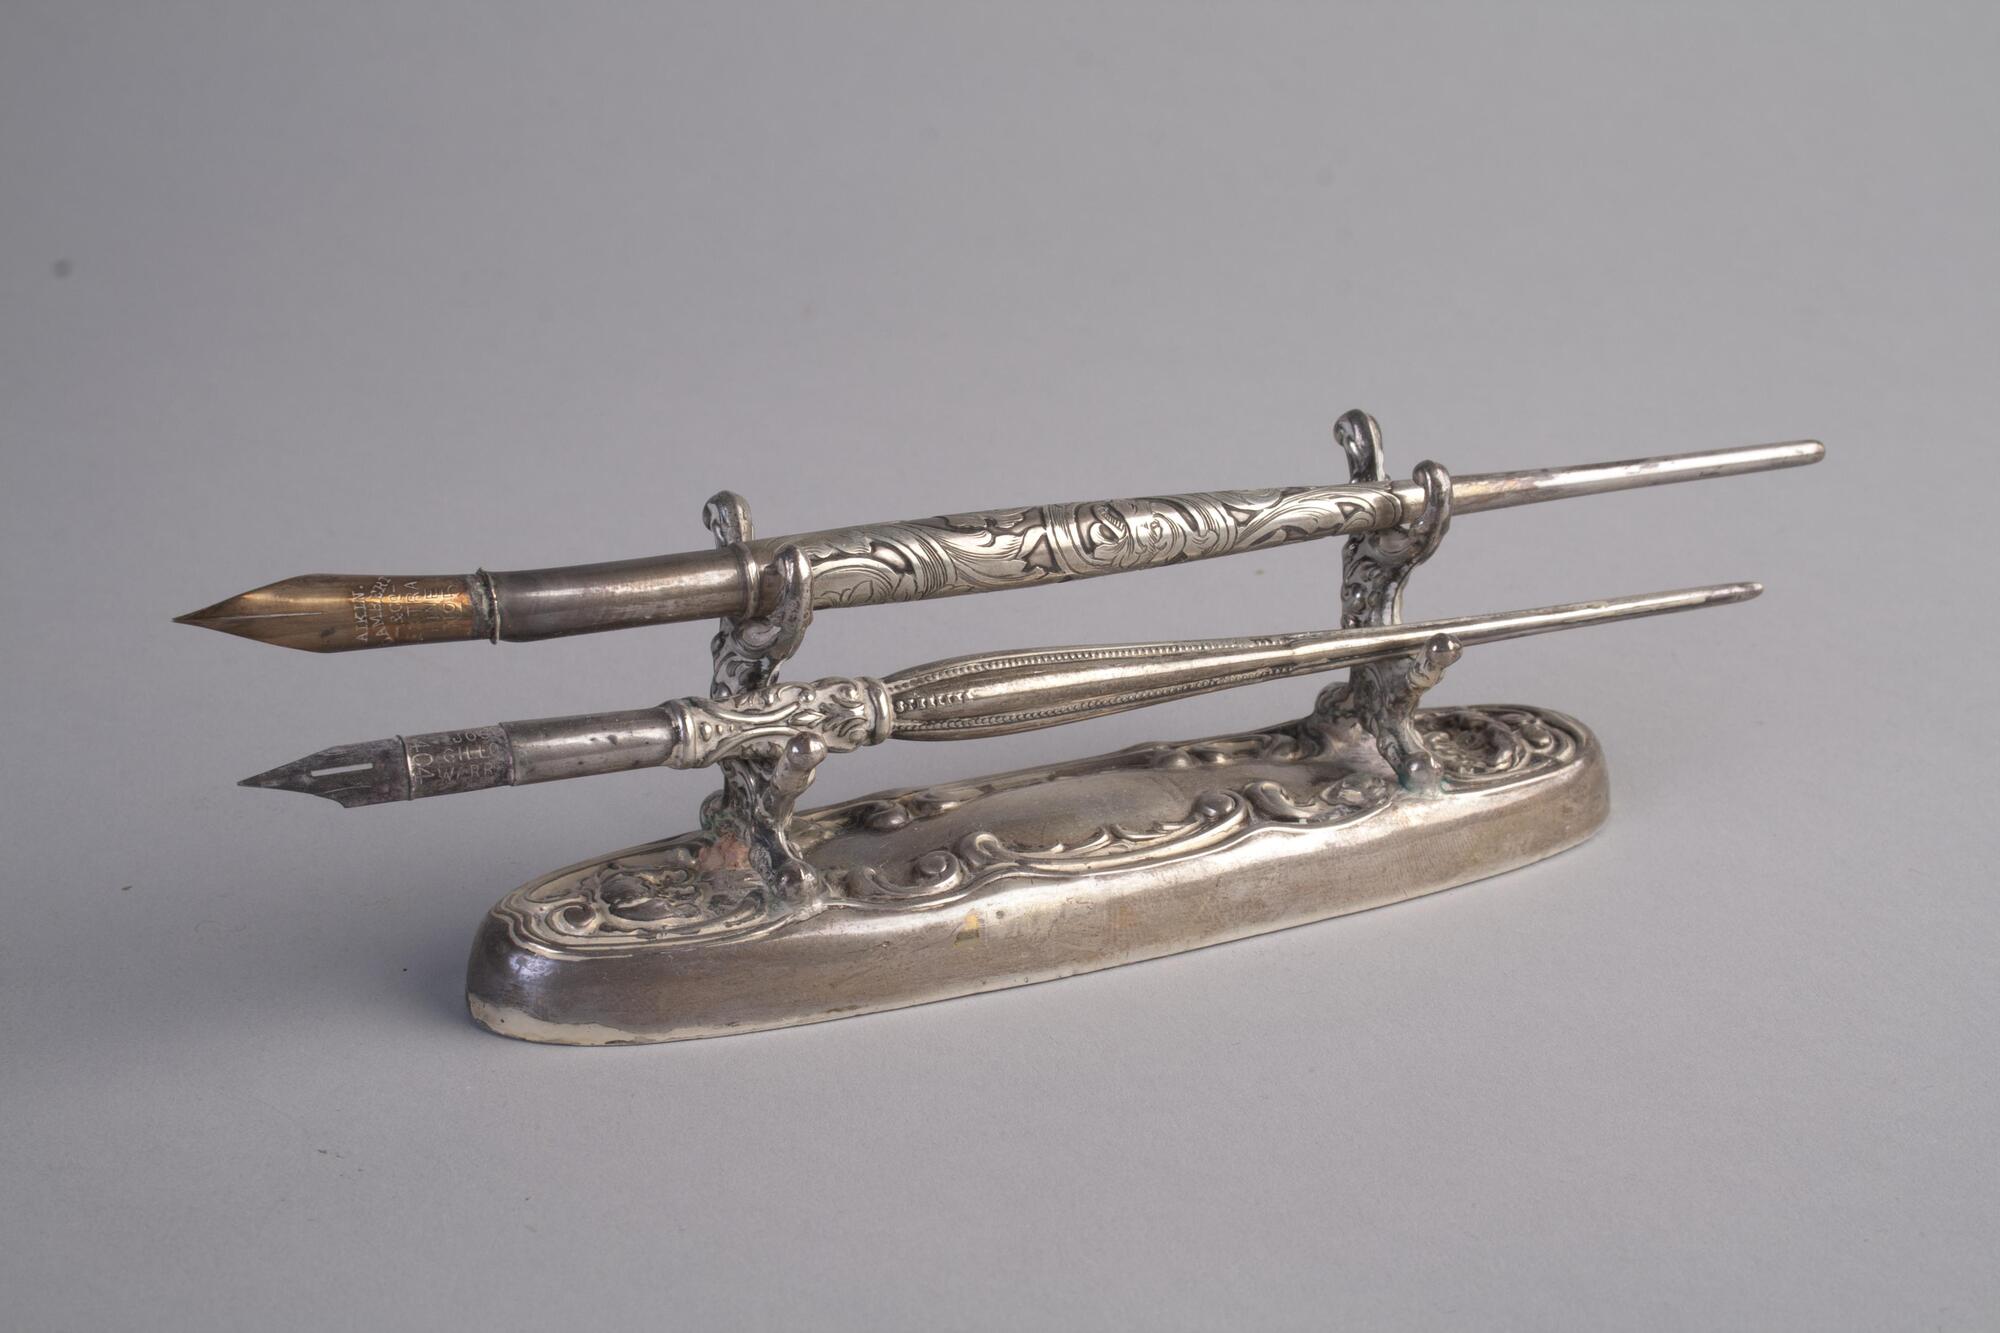 A pen holder with two pens. Both the pens and the holder are sterling silver and have scroll patterns.